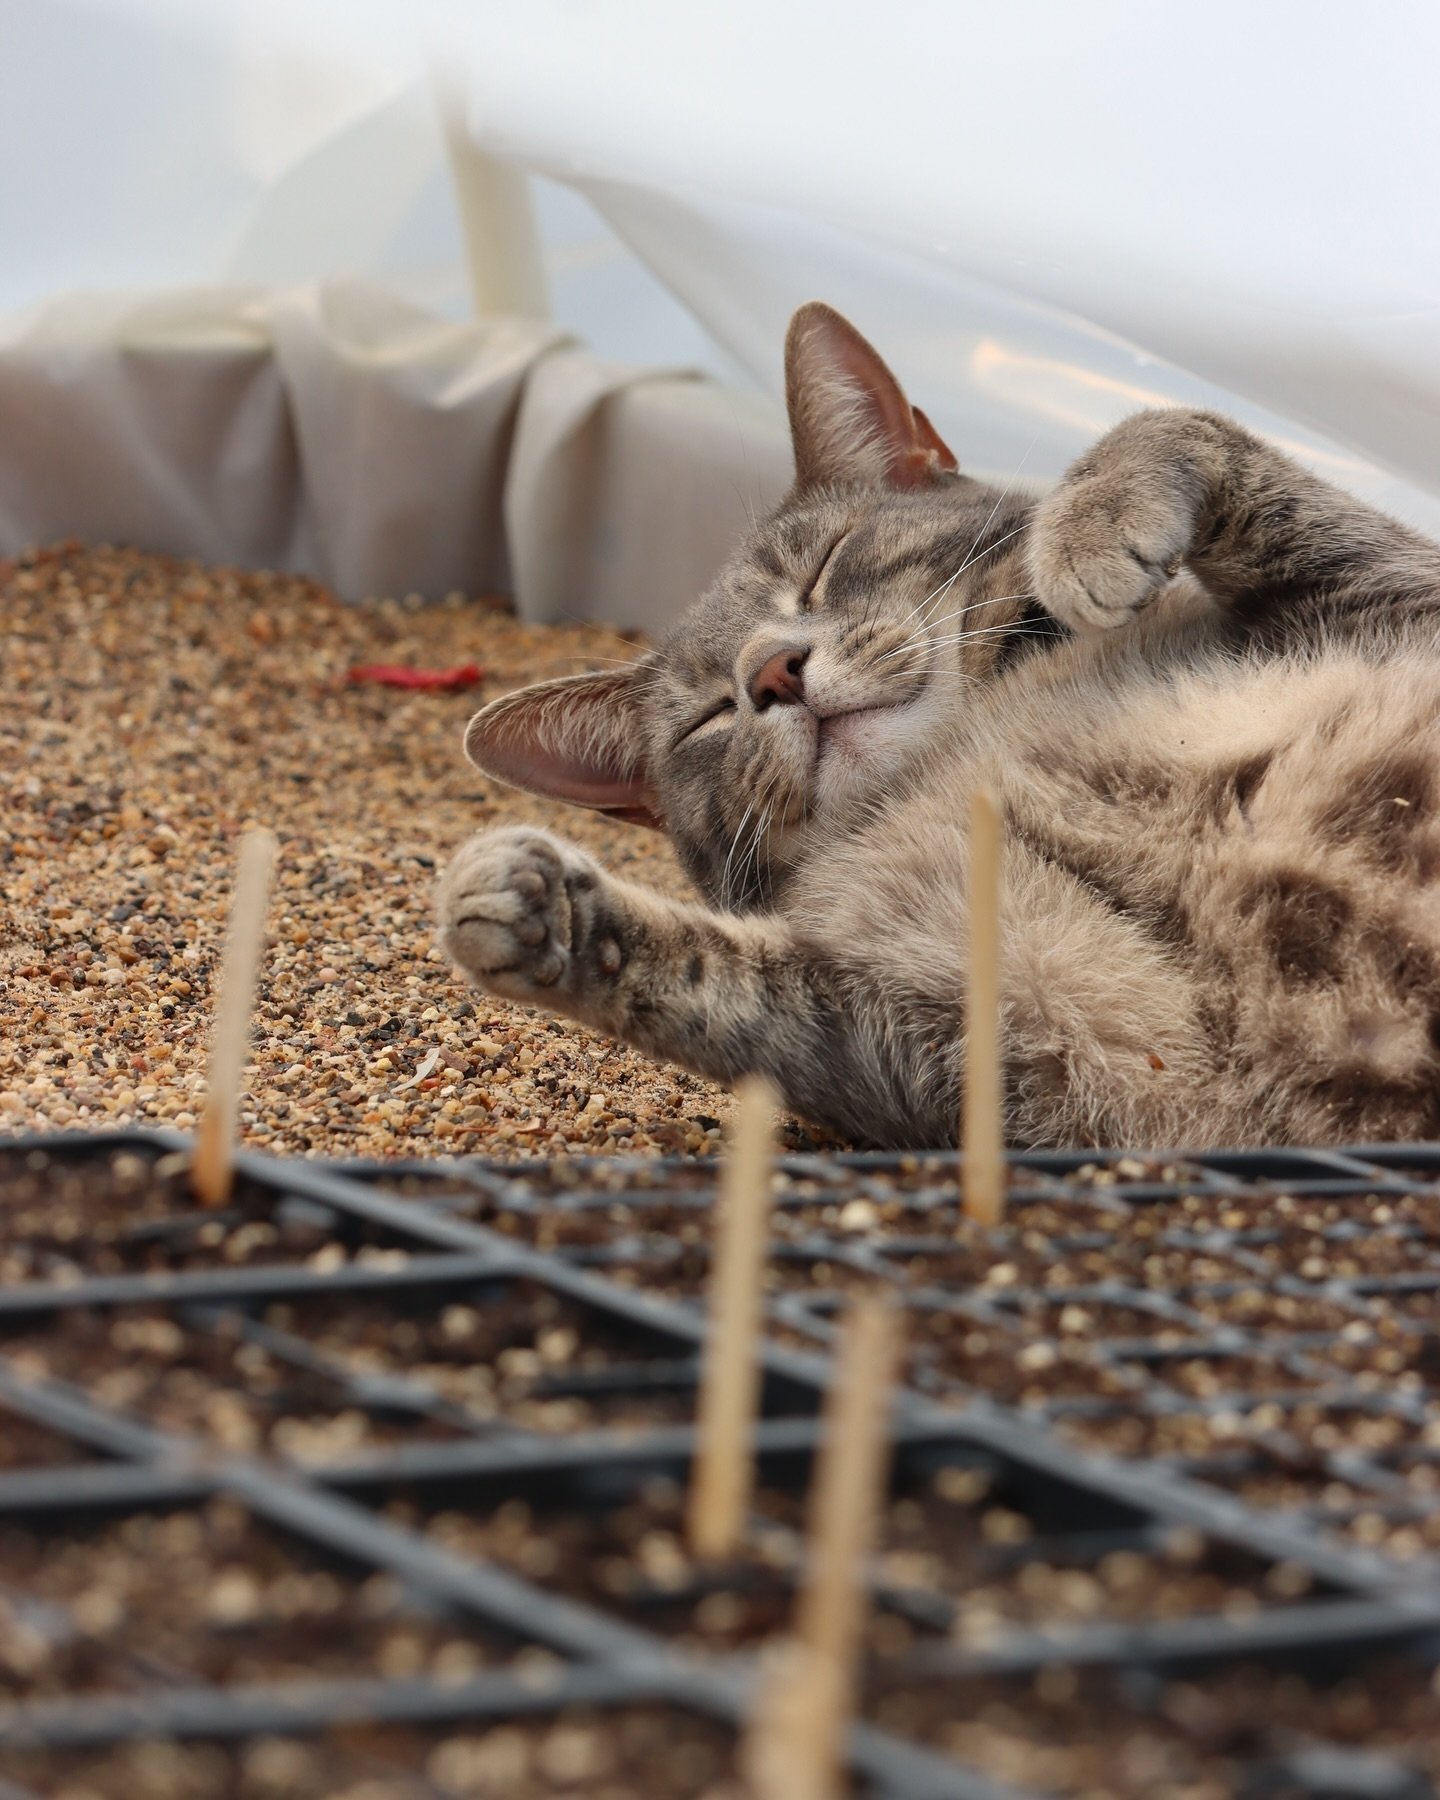 Happiness is a cat baking in a greenhouse 🌞

#greenhousecats #propagationstation #seedstarting